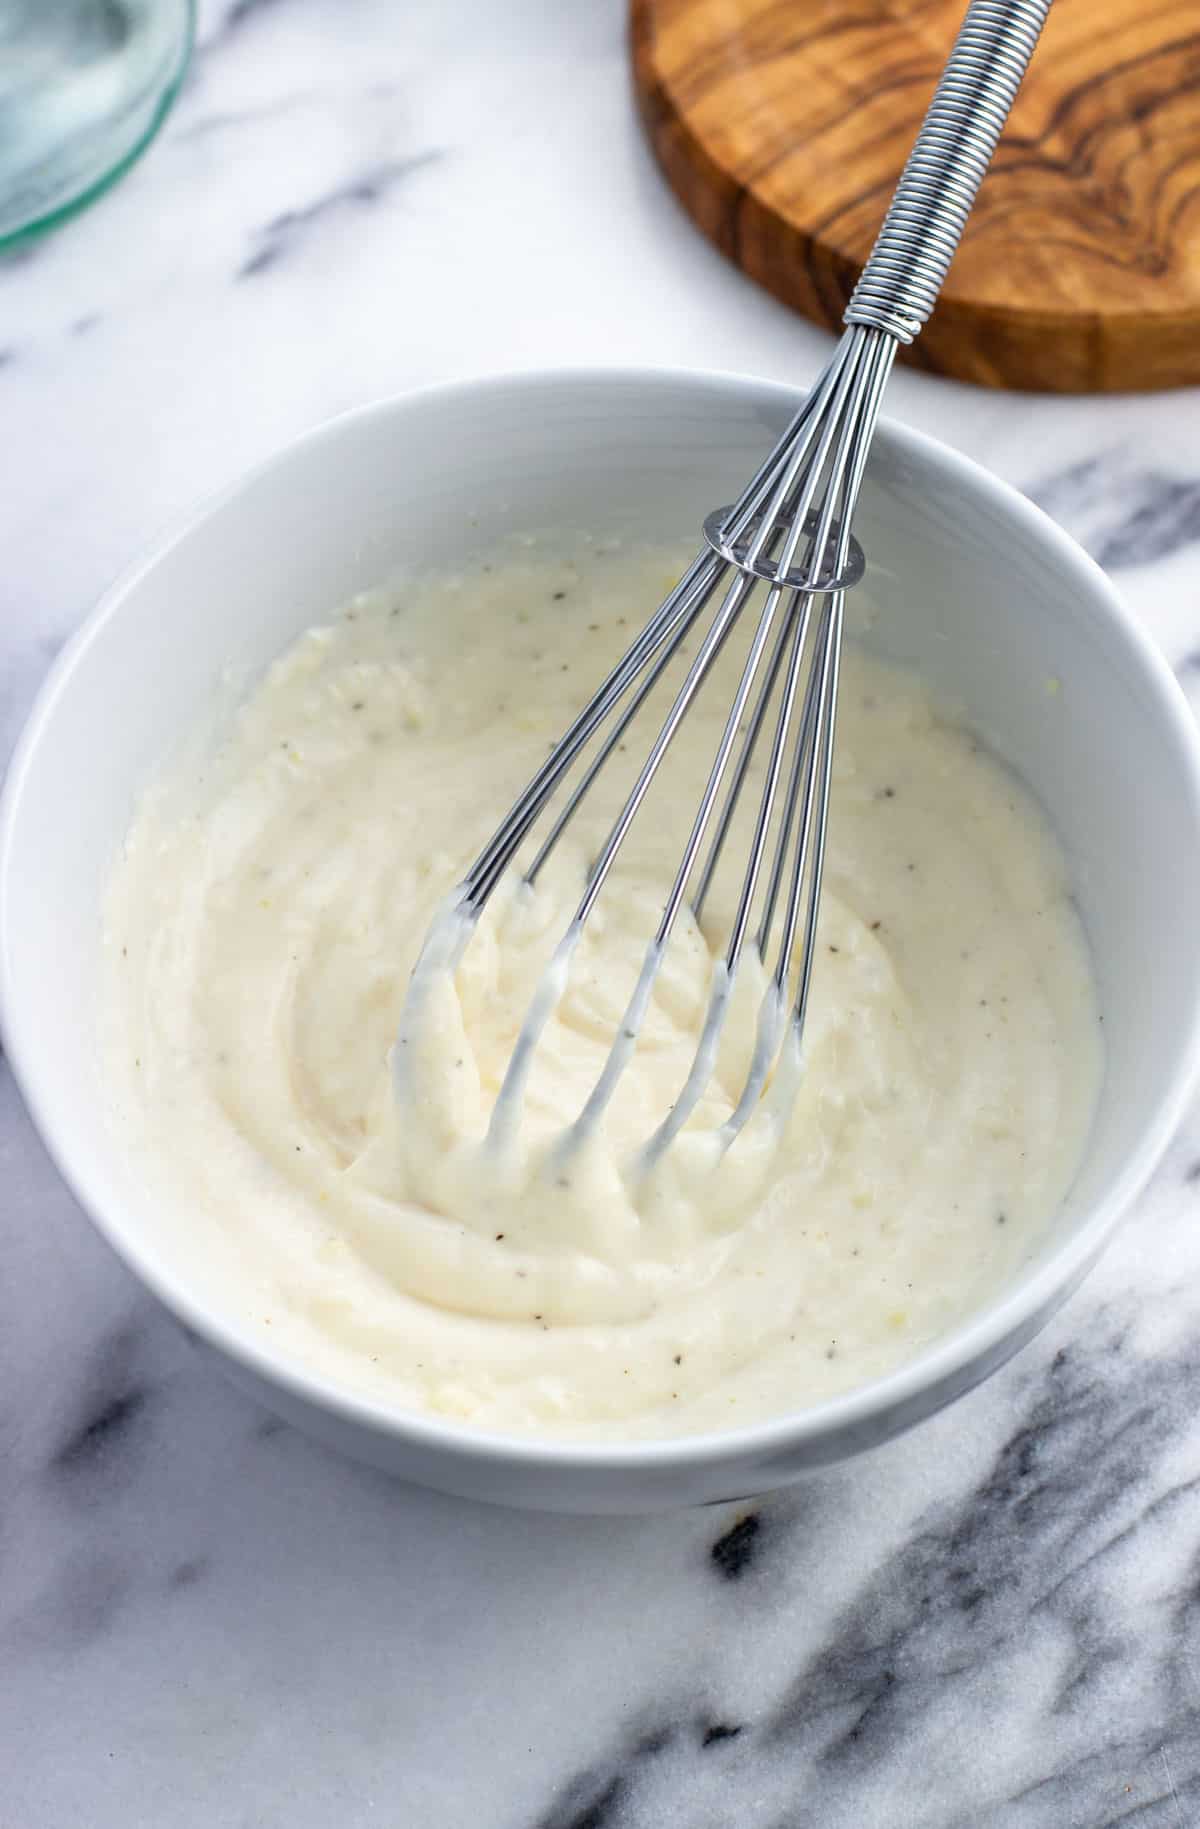 Horseradish aioli whisked together in a bowl.